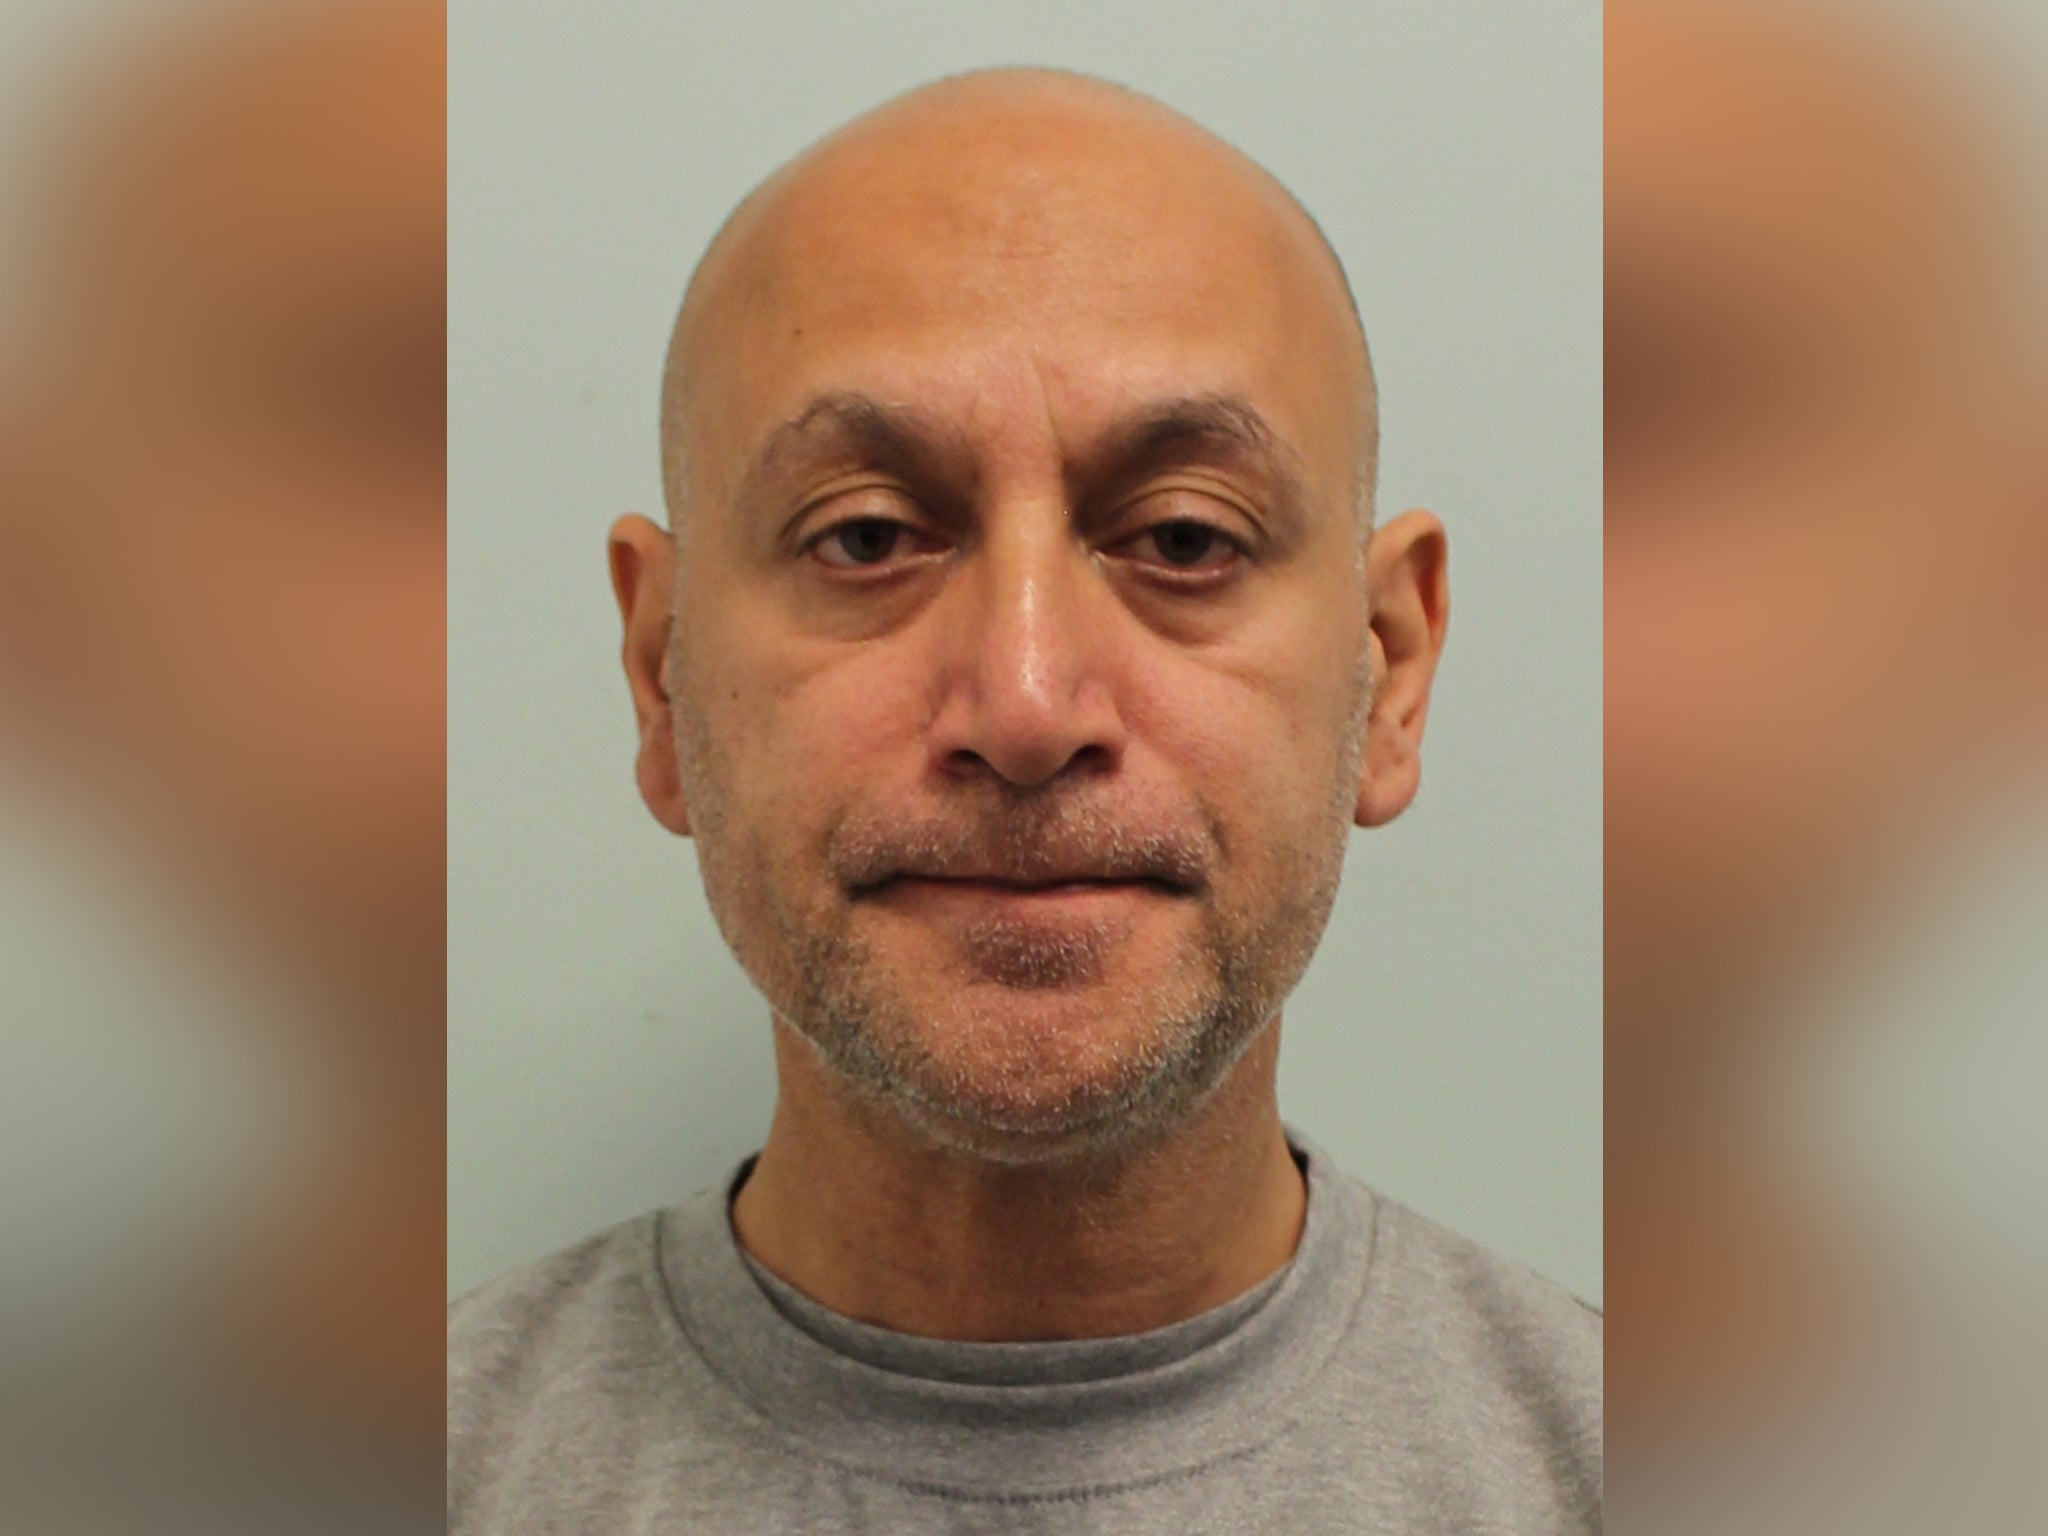 Majid Butt, 51, admitted murder and was jailed for life